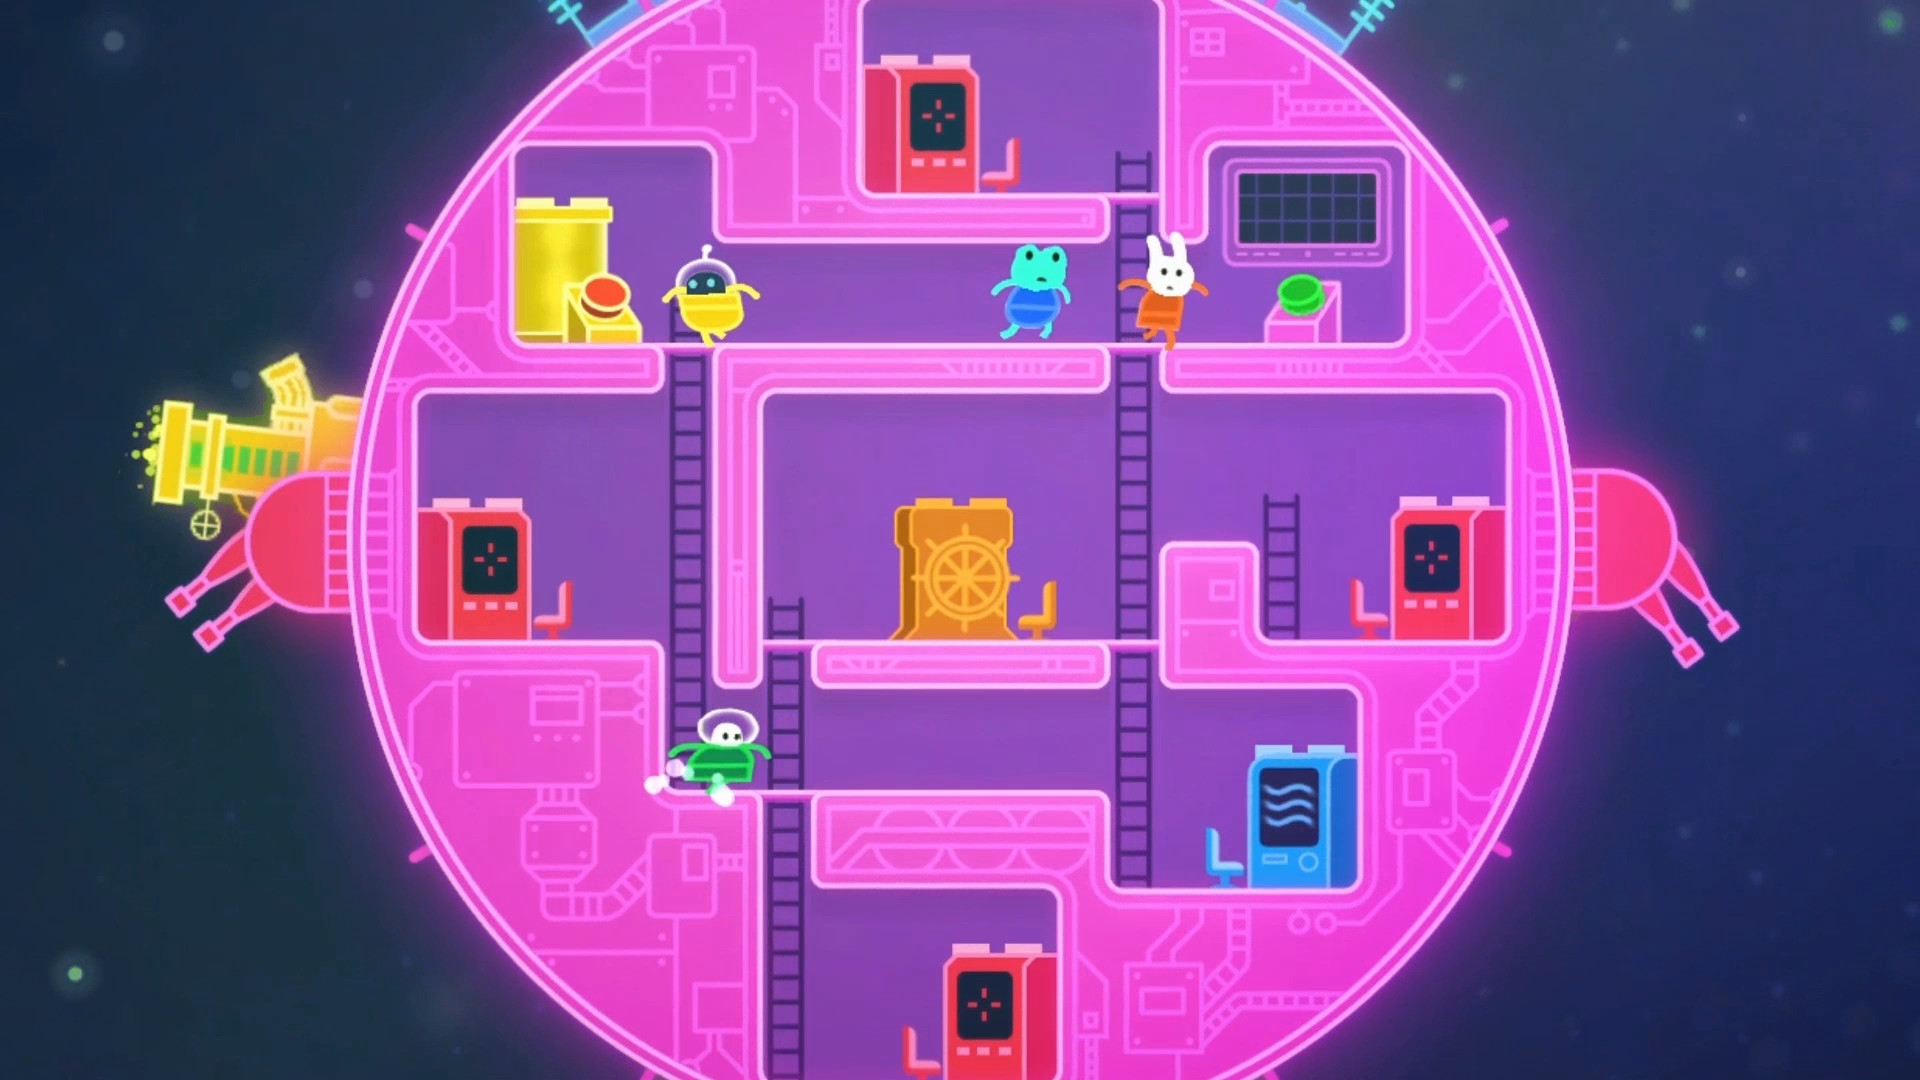 Lovers in a Dangerous Spacetime Free Download